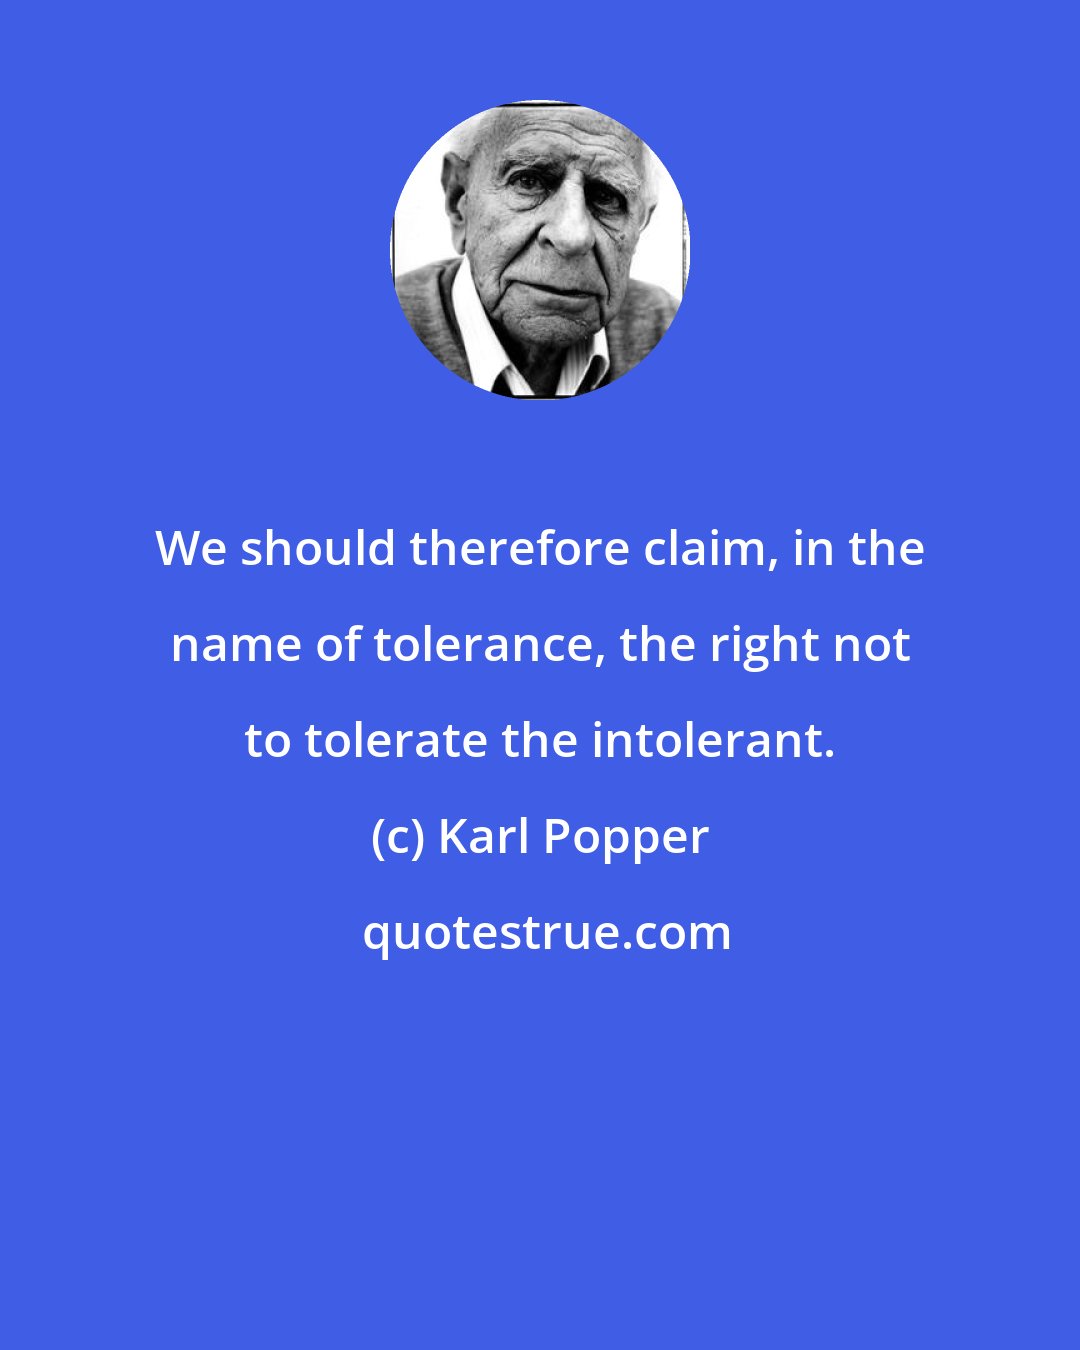 Karl Popper: We should therefore claim, in the name of tolerance, the right not to tolerate the intolerant.